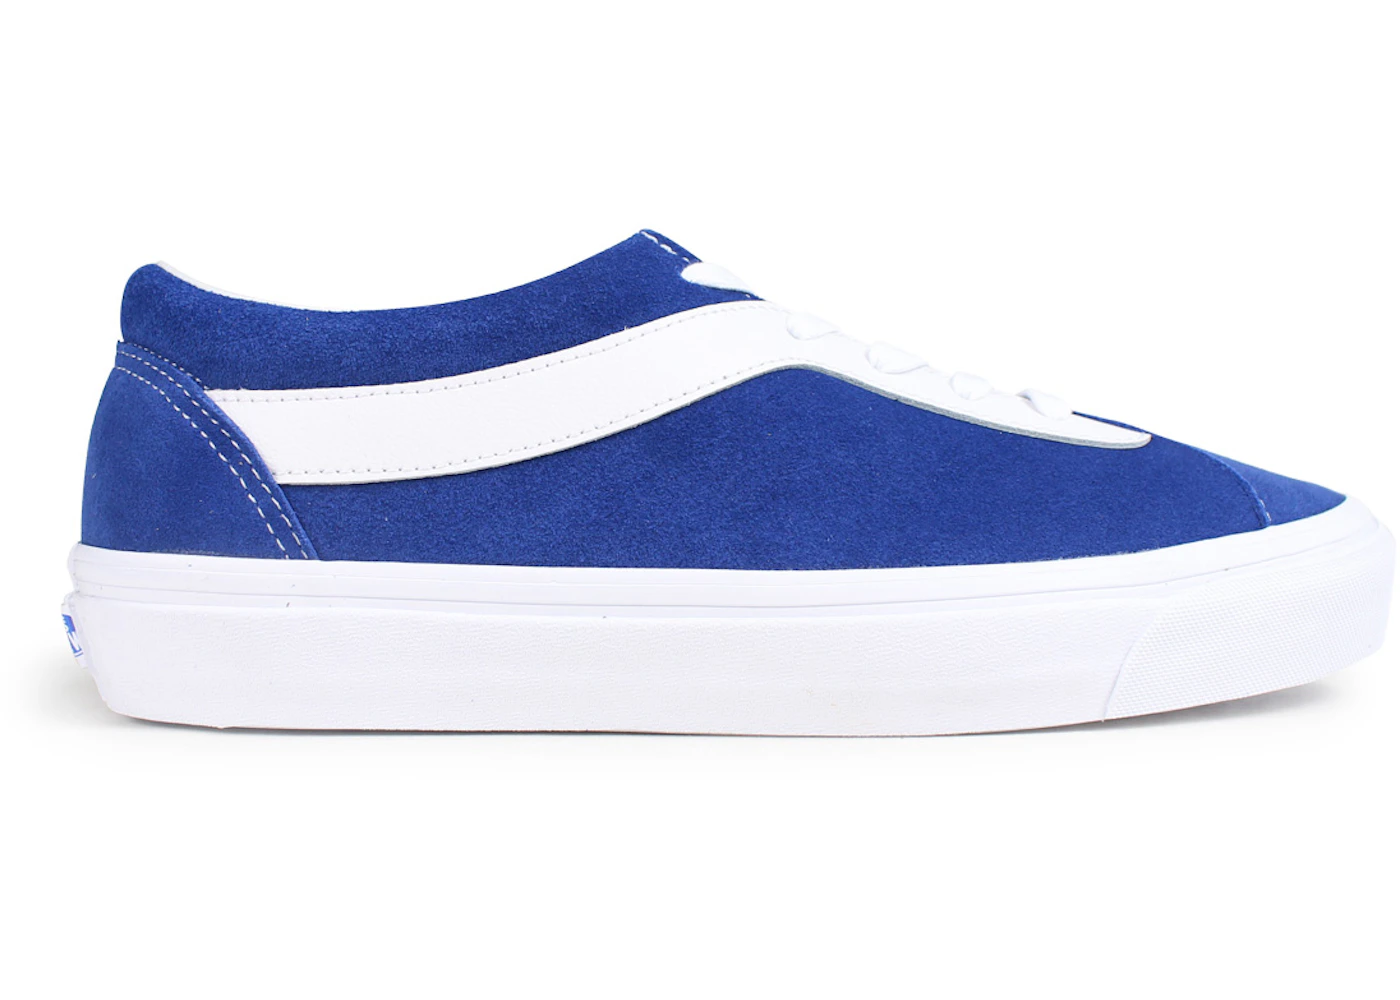 Baleen whale Setting get together Vans Bold Ni Blue - VN0A3WLPULD - US